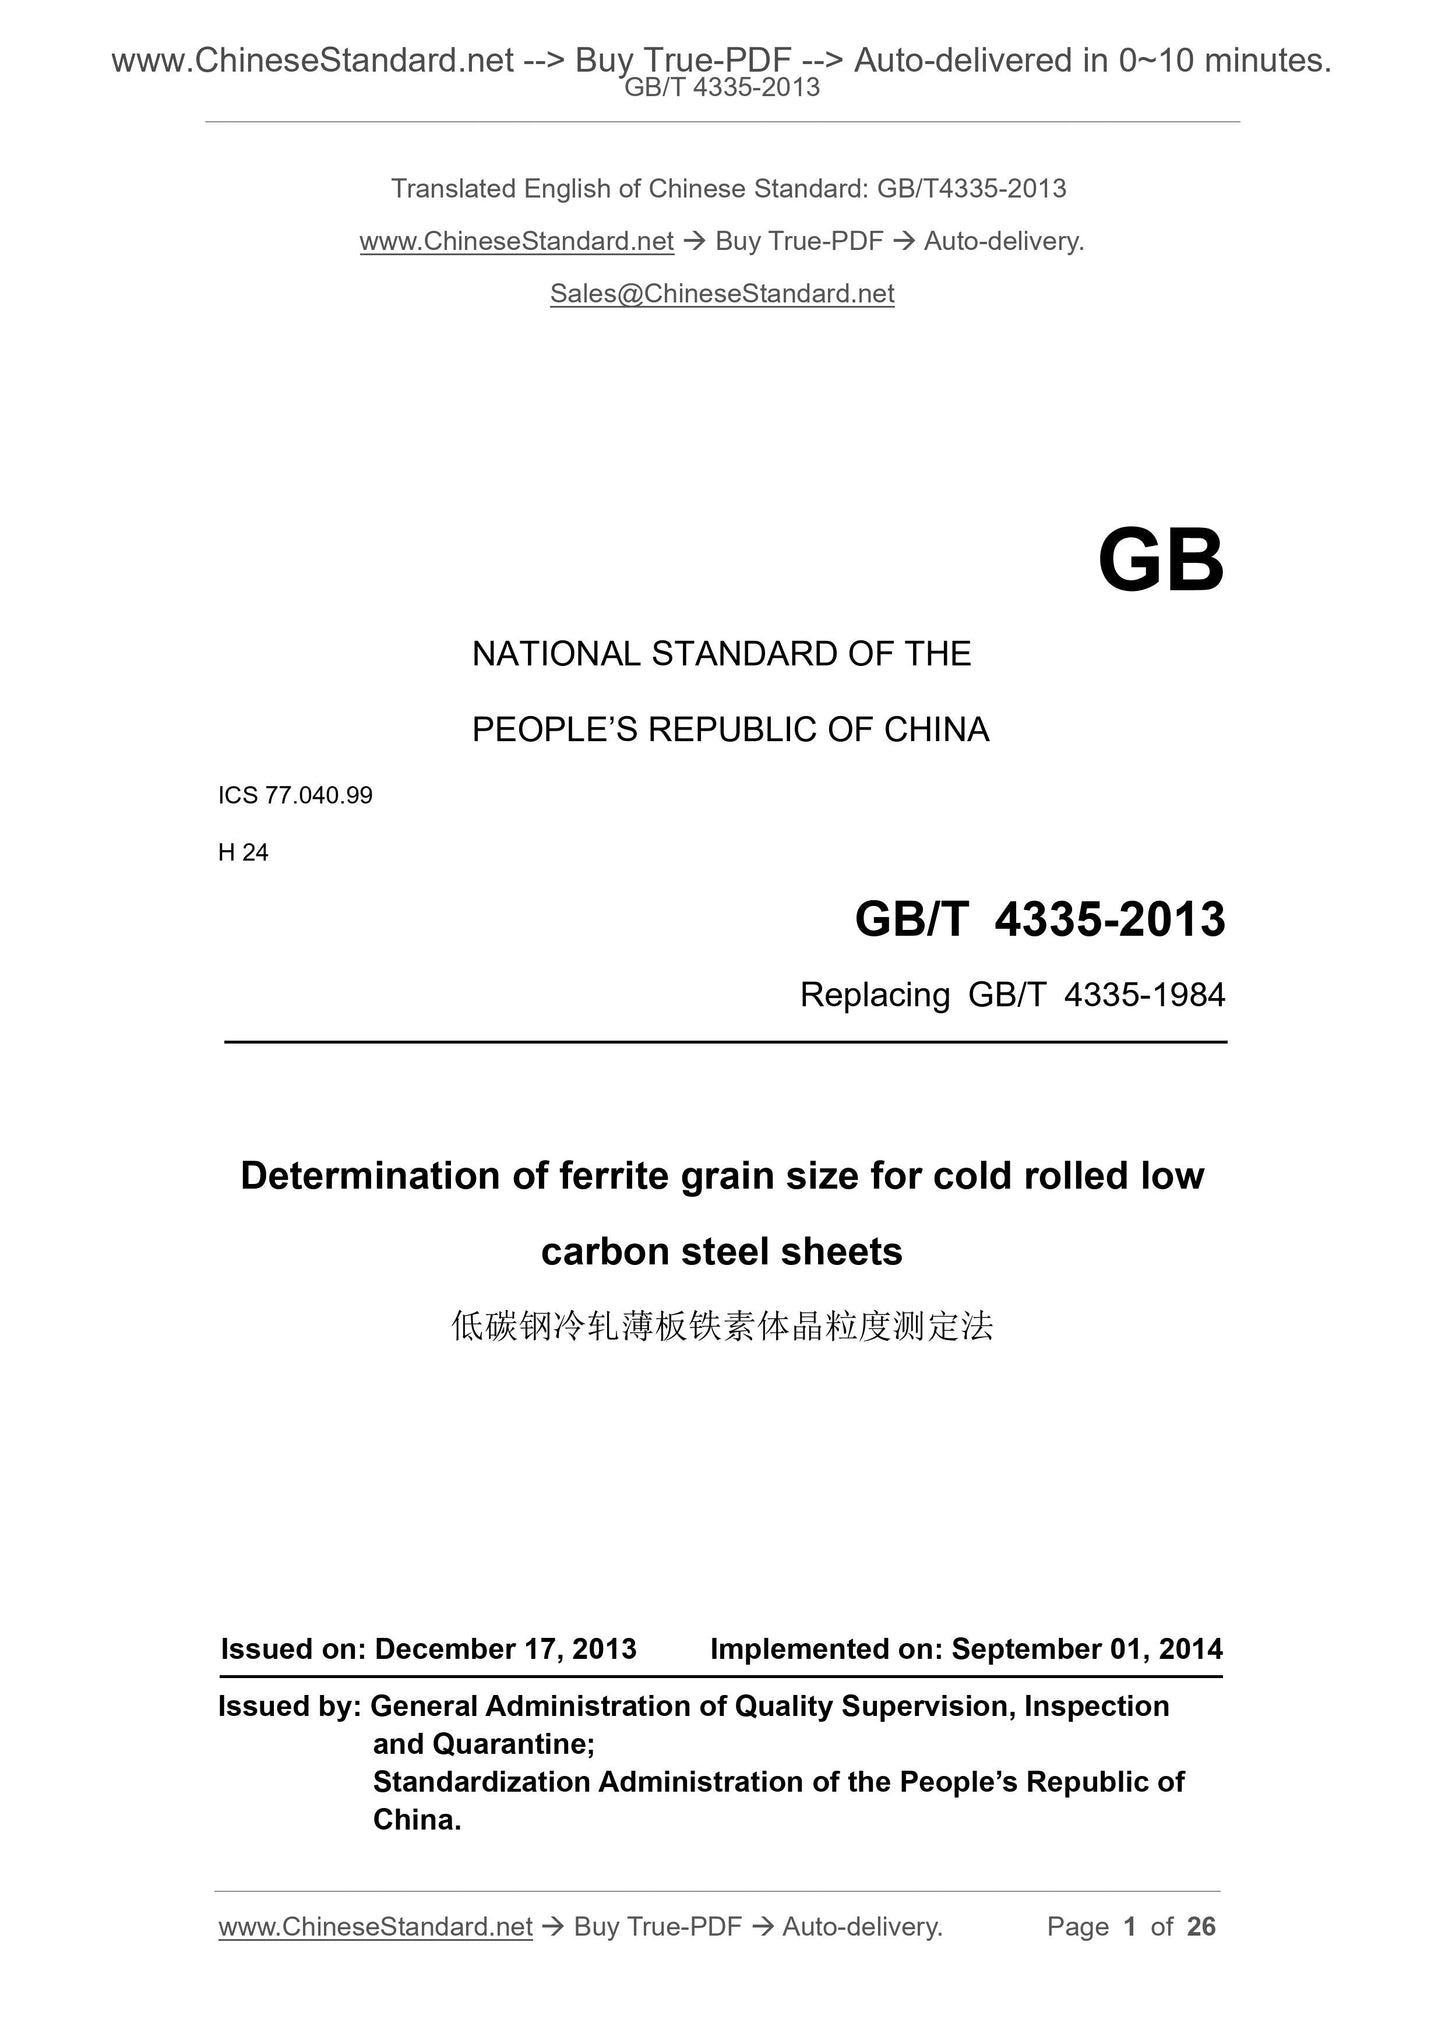 GB/T 4335-2013 Page 1